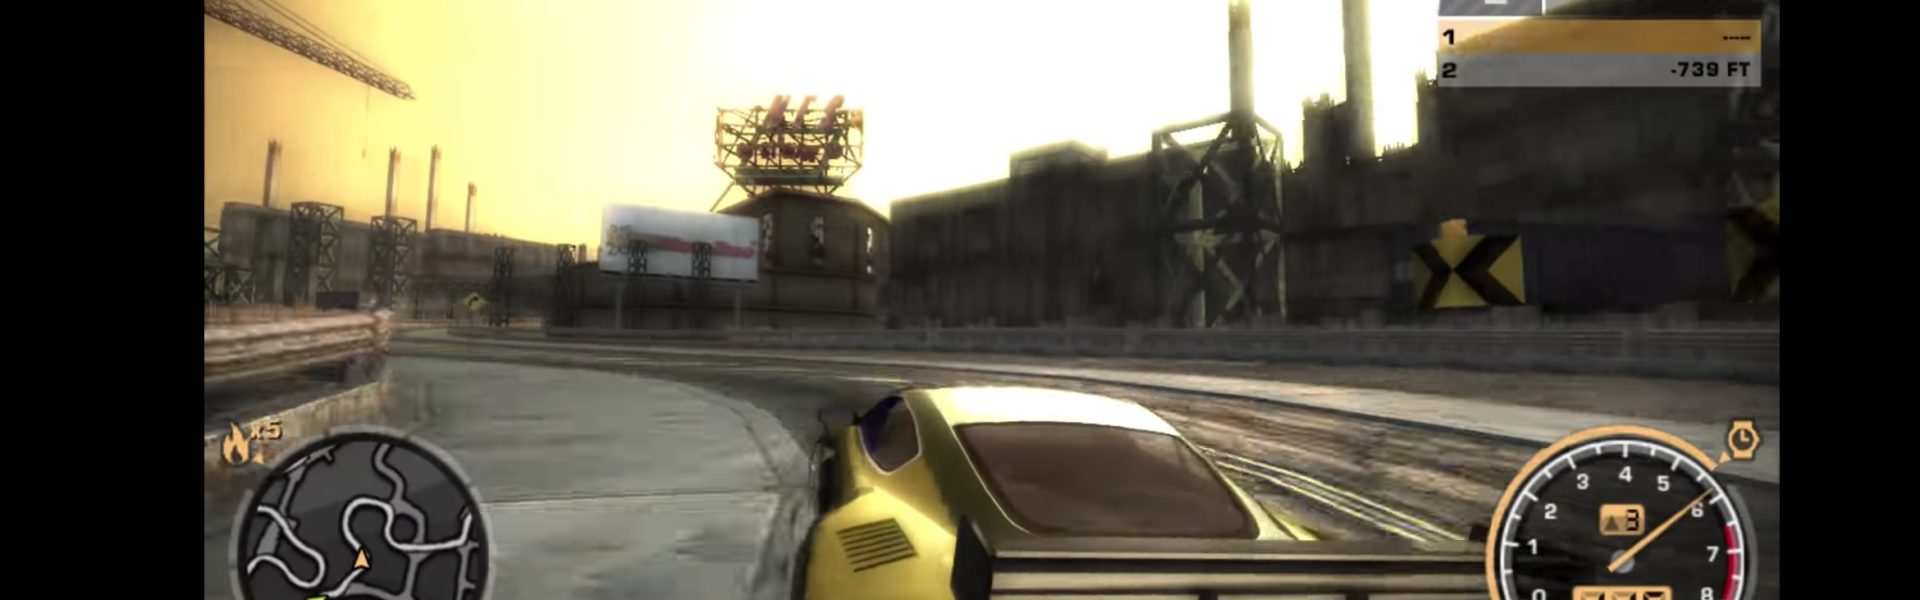 nfs most wanted 2005 car guide